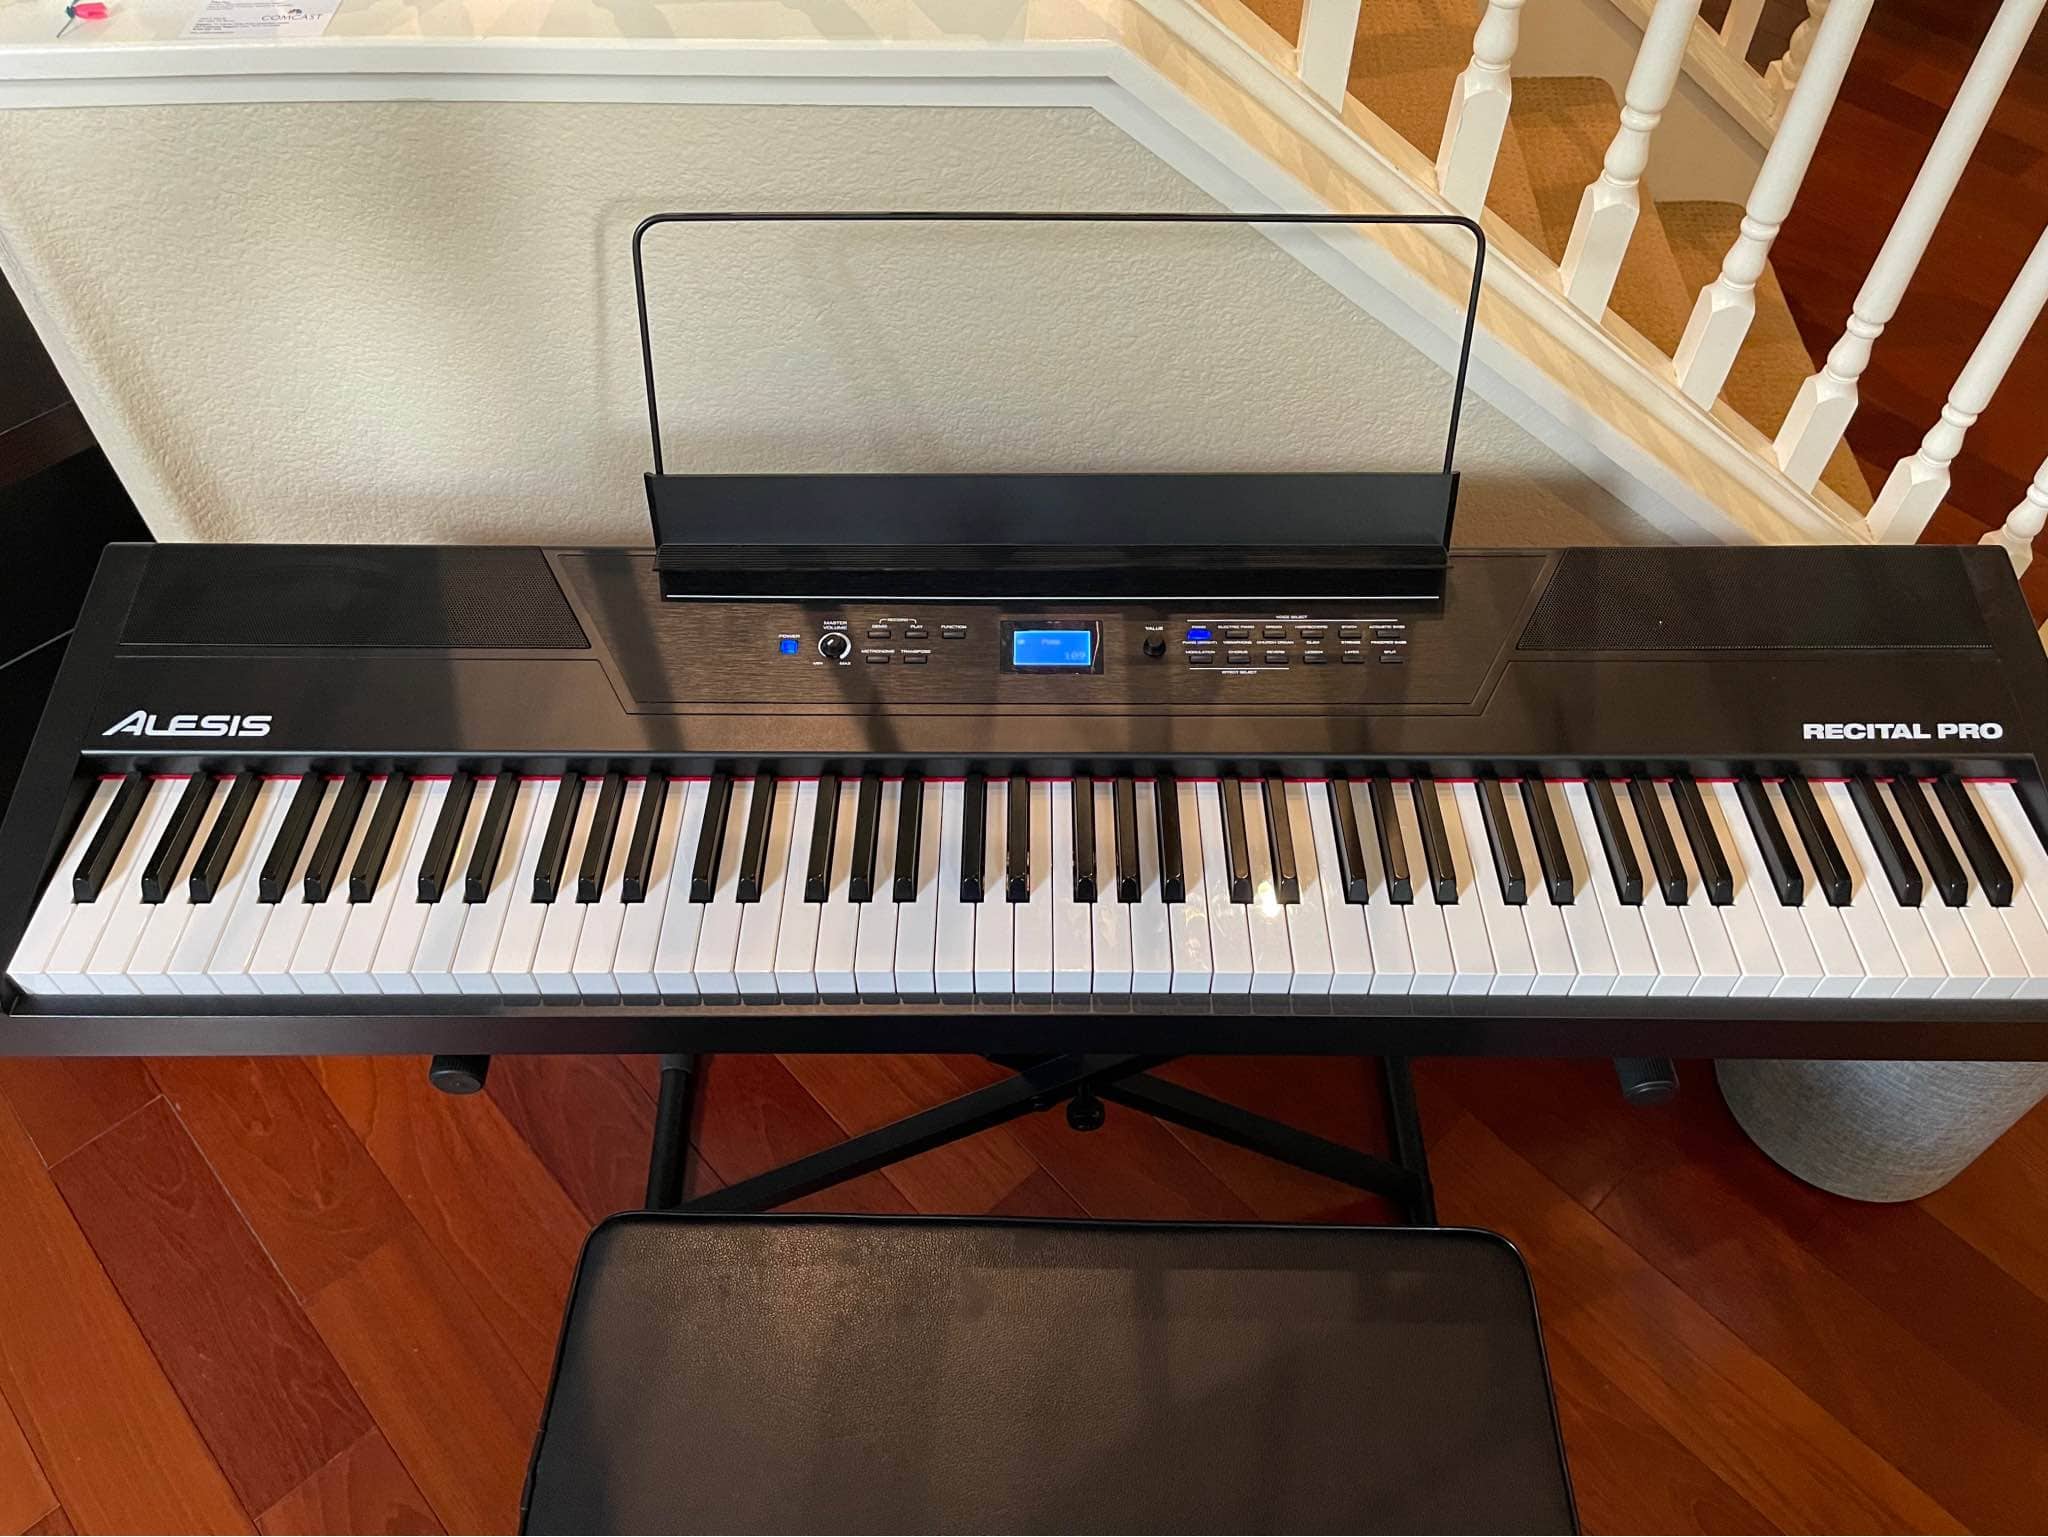 The Alesis Recital Pro features split, dual, and duo mode